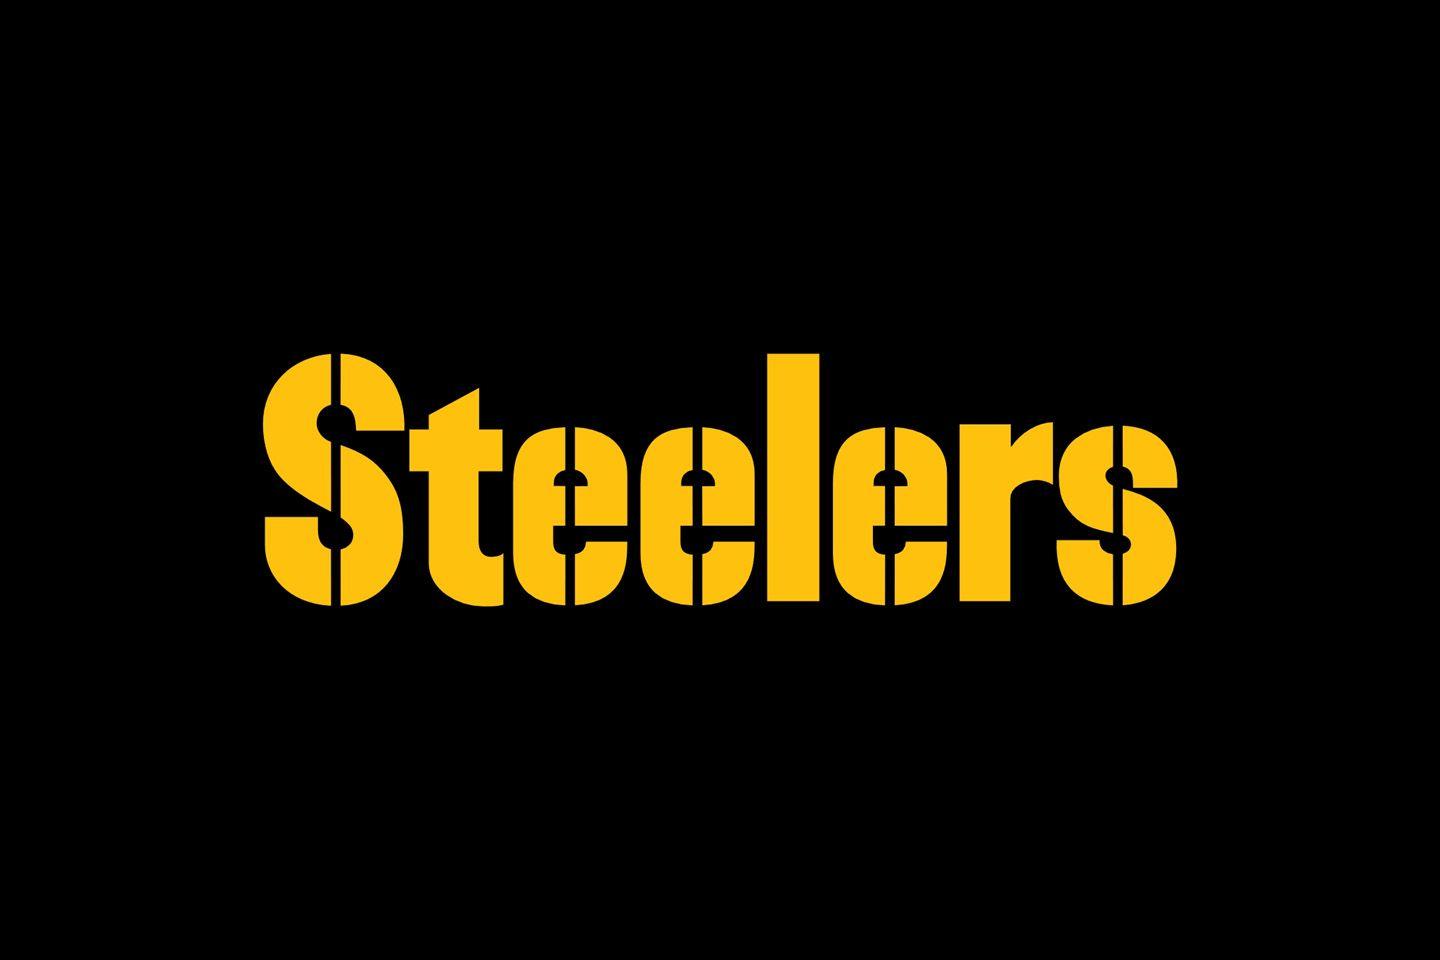 Awesome Pittsburgh Steelers wallpaper. Pittsburgh Steelers wallpaper